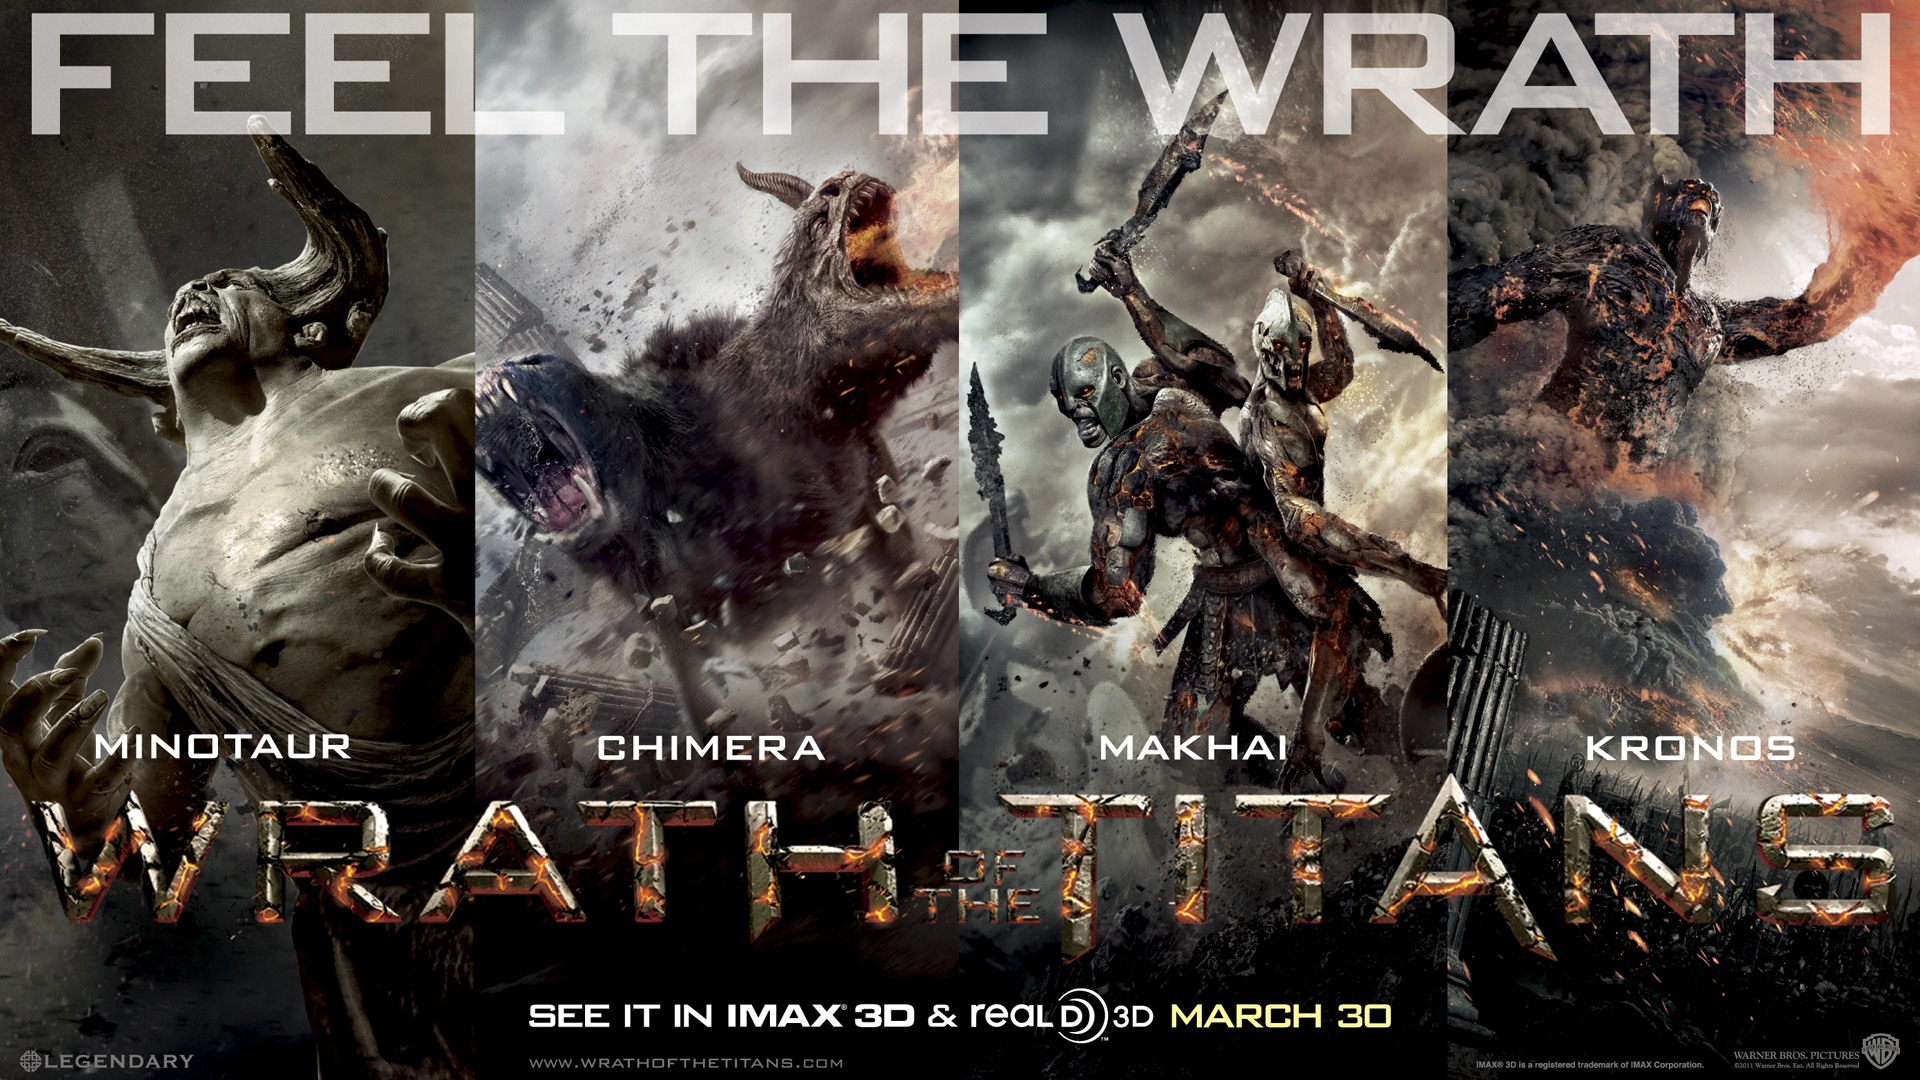 Wrath of the Titans HD Wallpapers #11 - 1920x1080